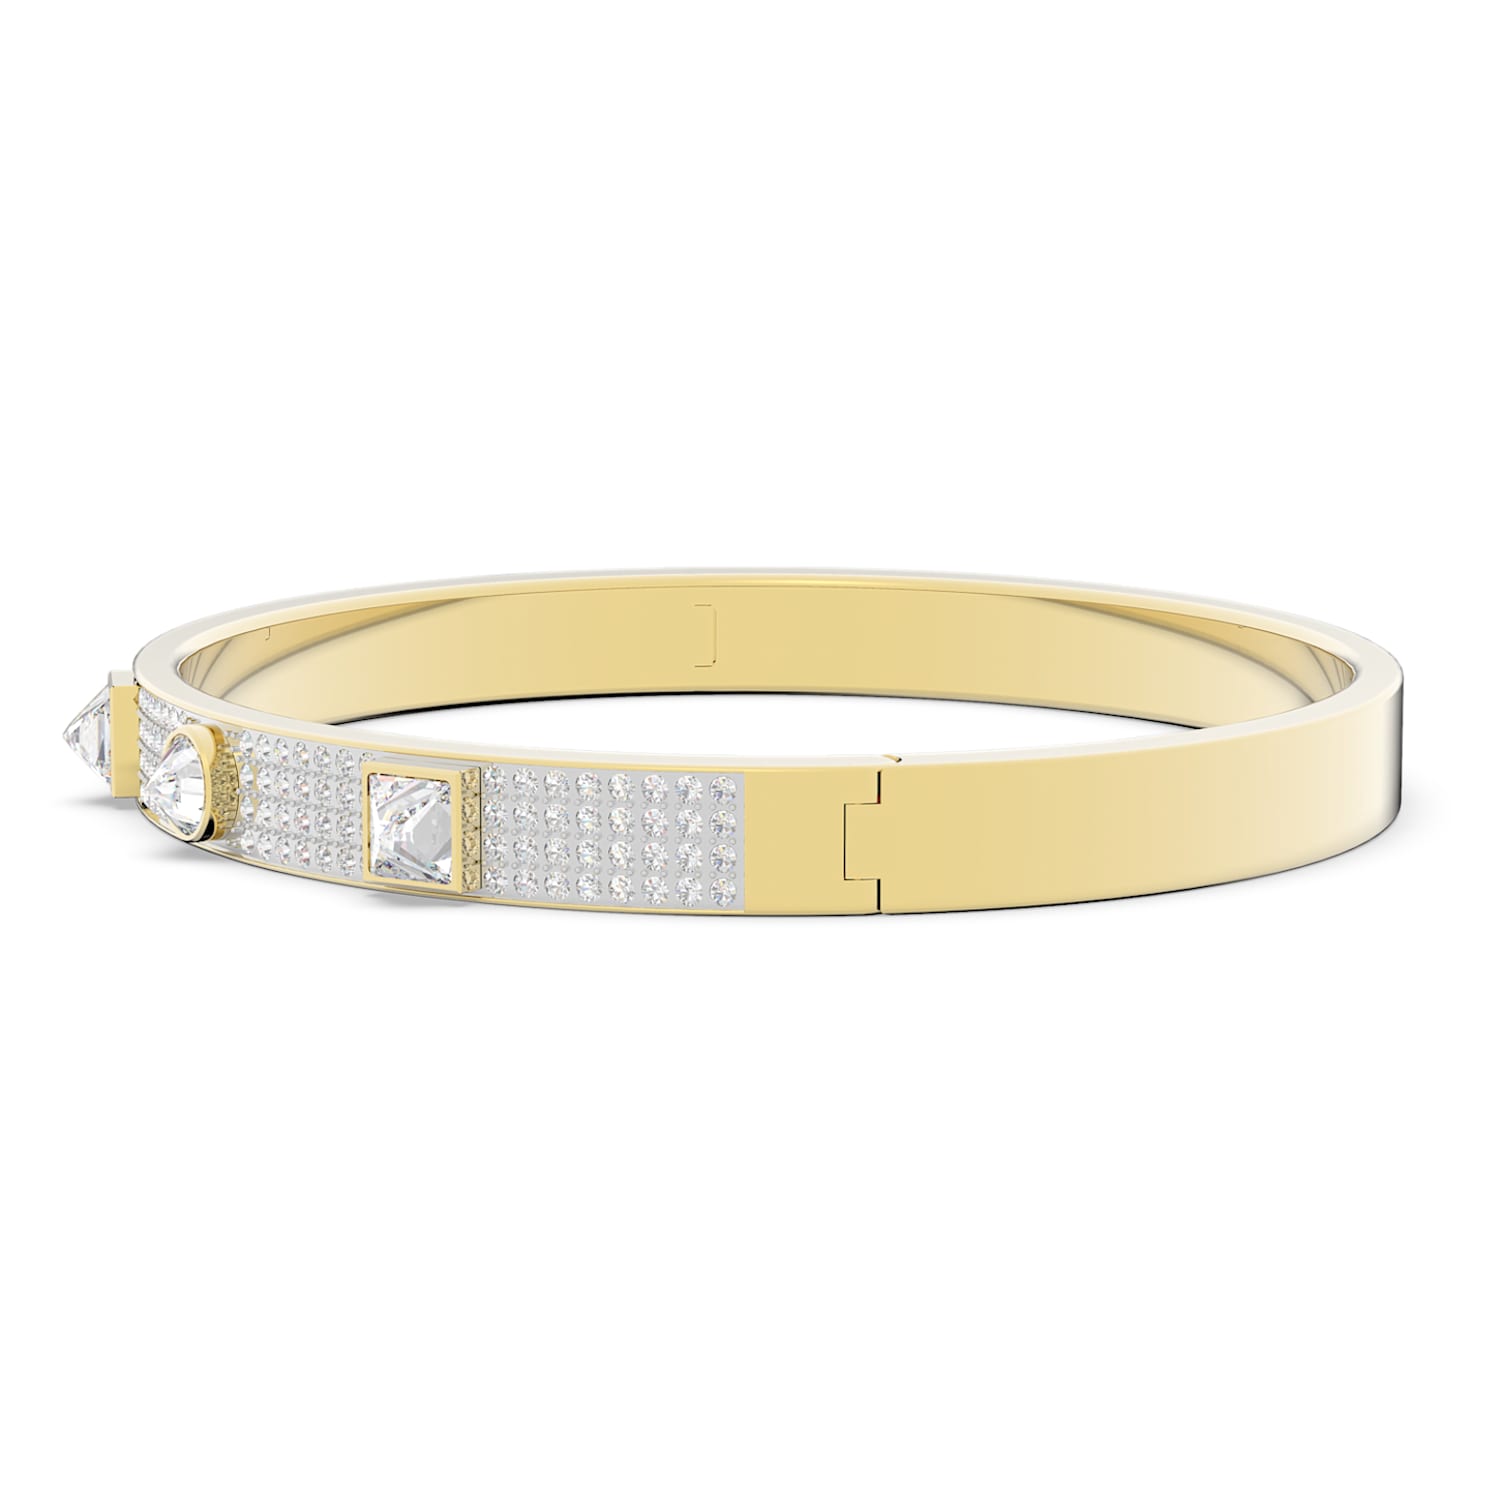 Thrilling bangle, Mixed cuts, Pavé, White, Gold-tone plated 